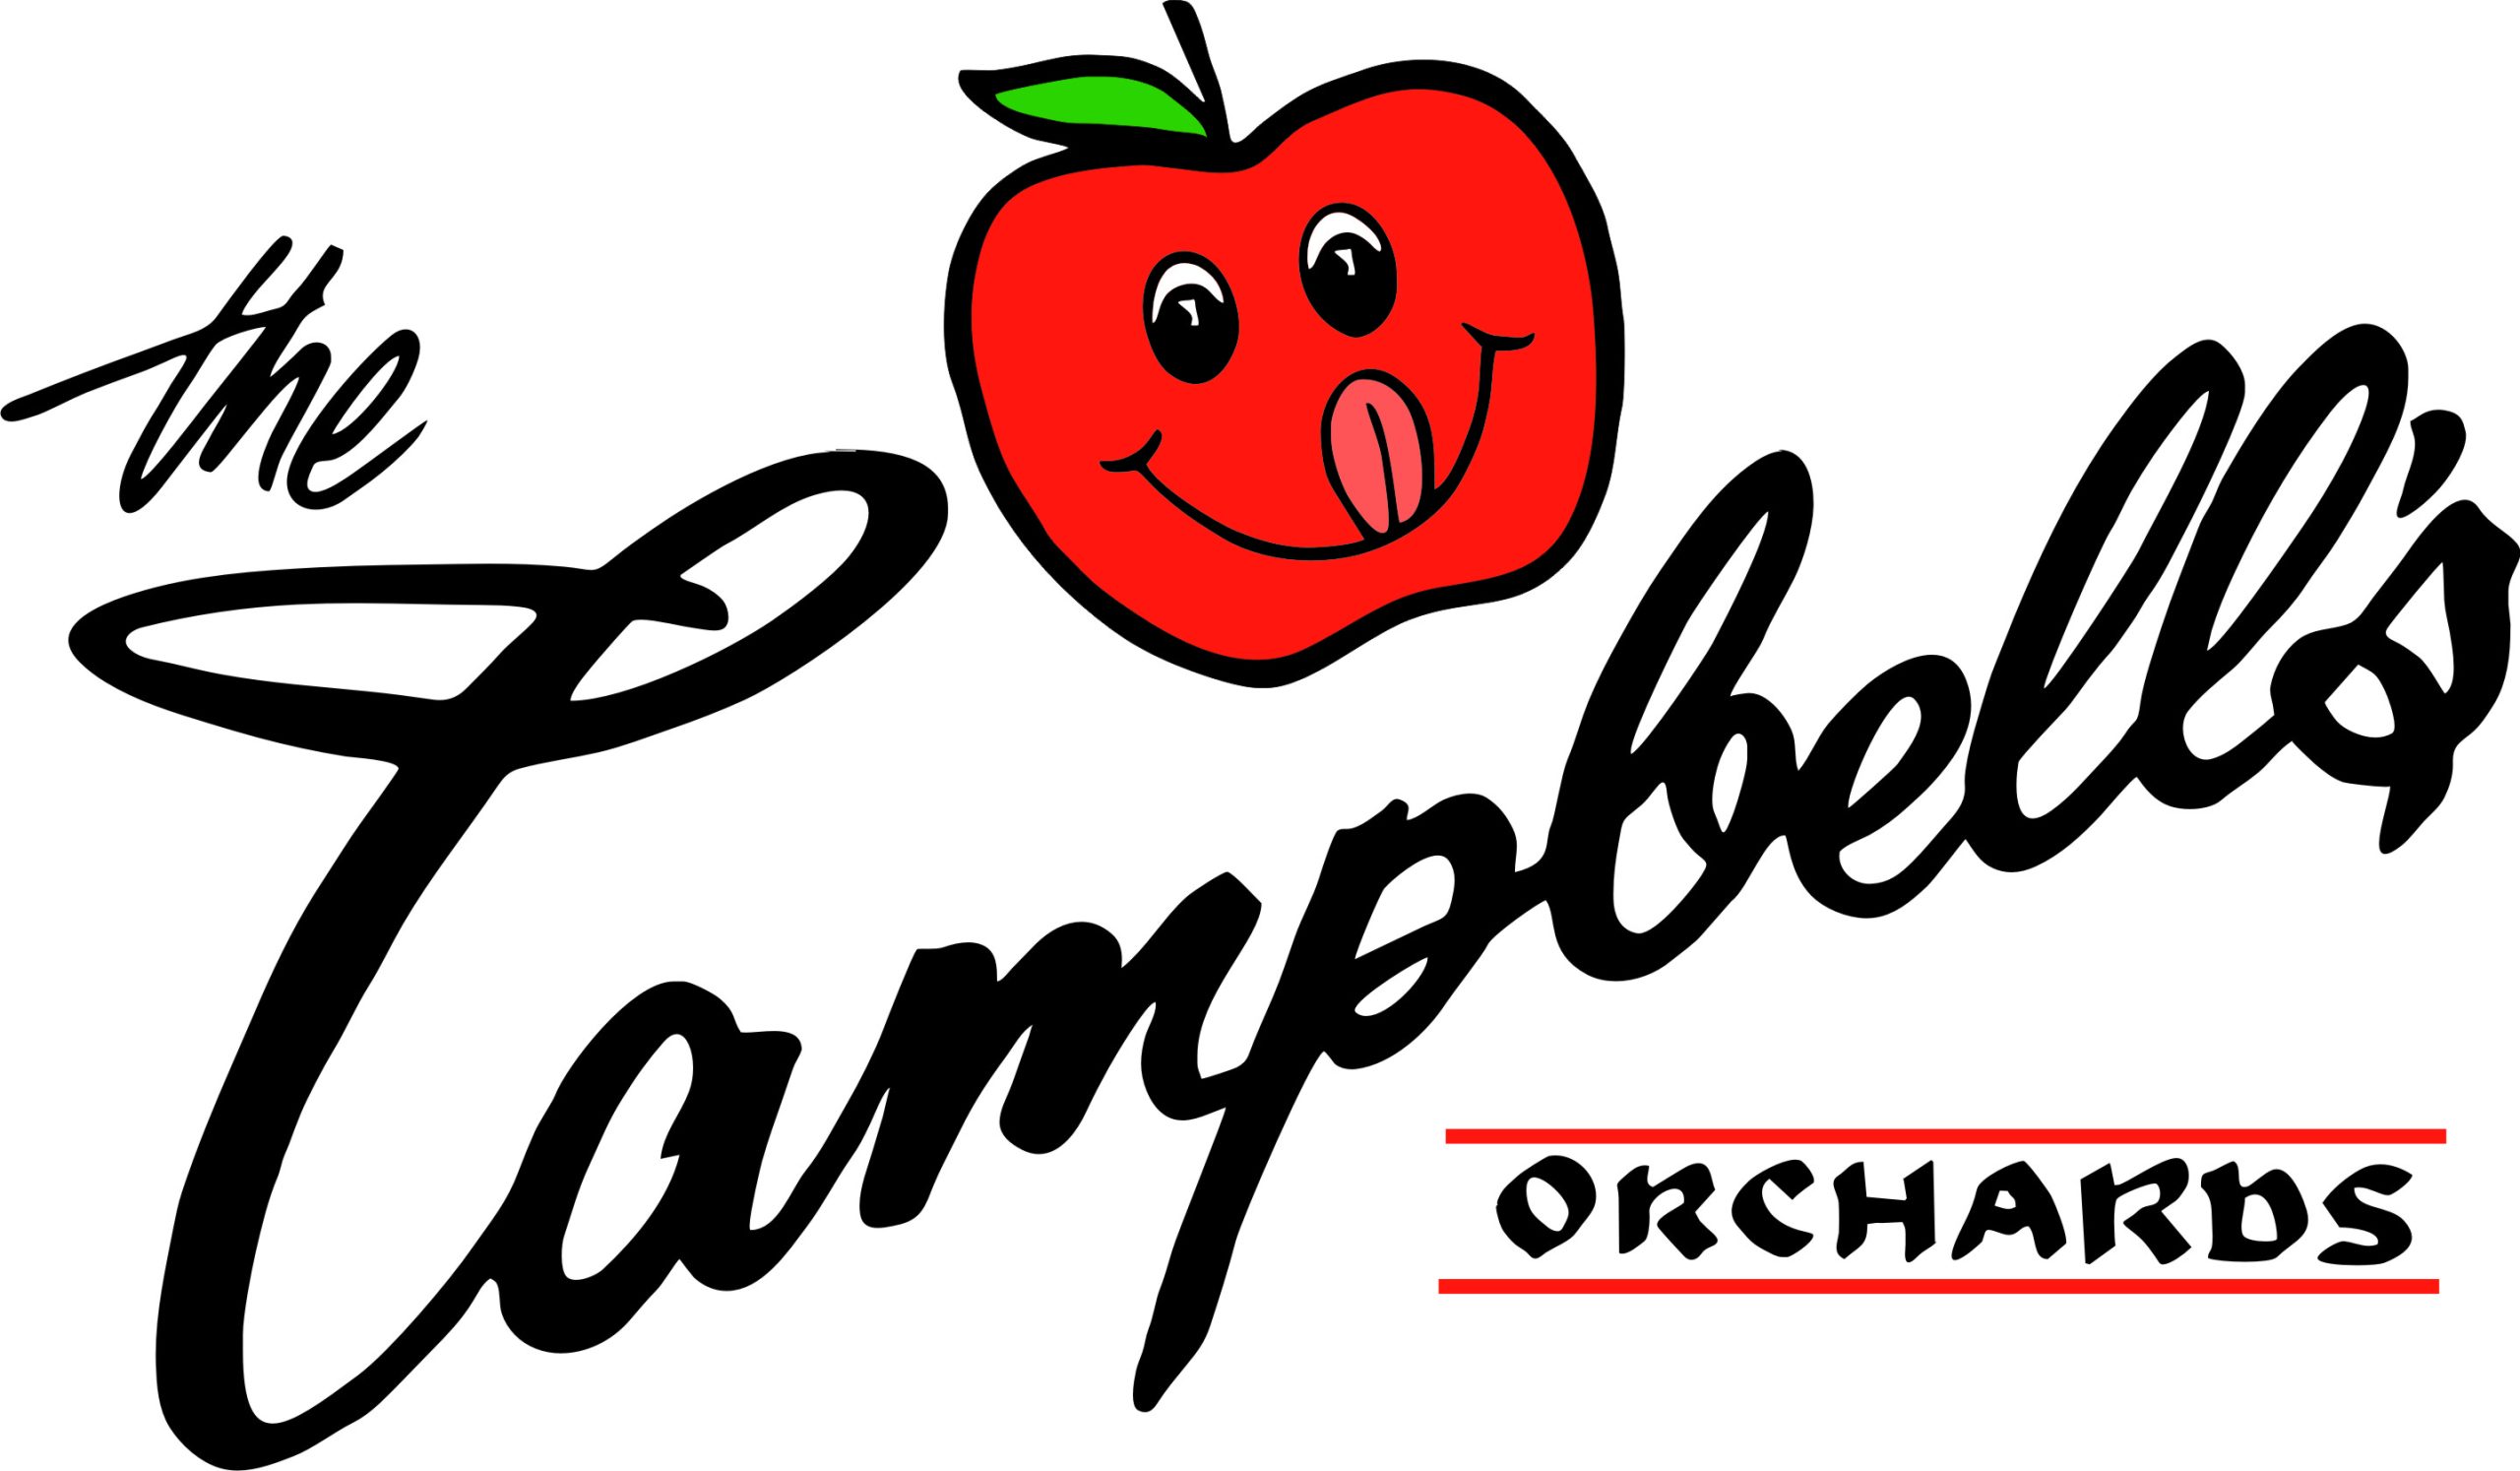 The Campbell's Orchards